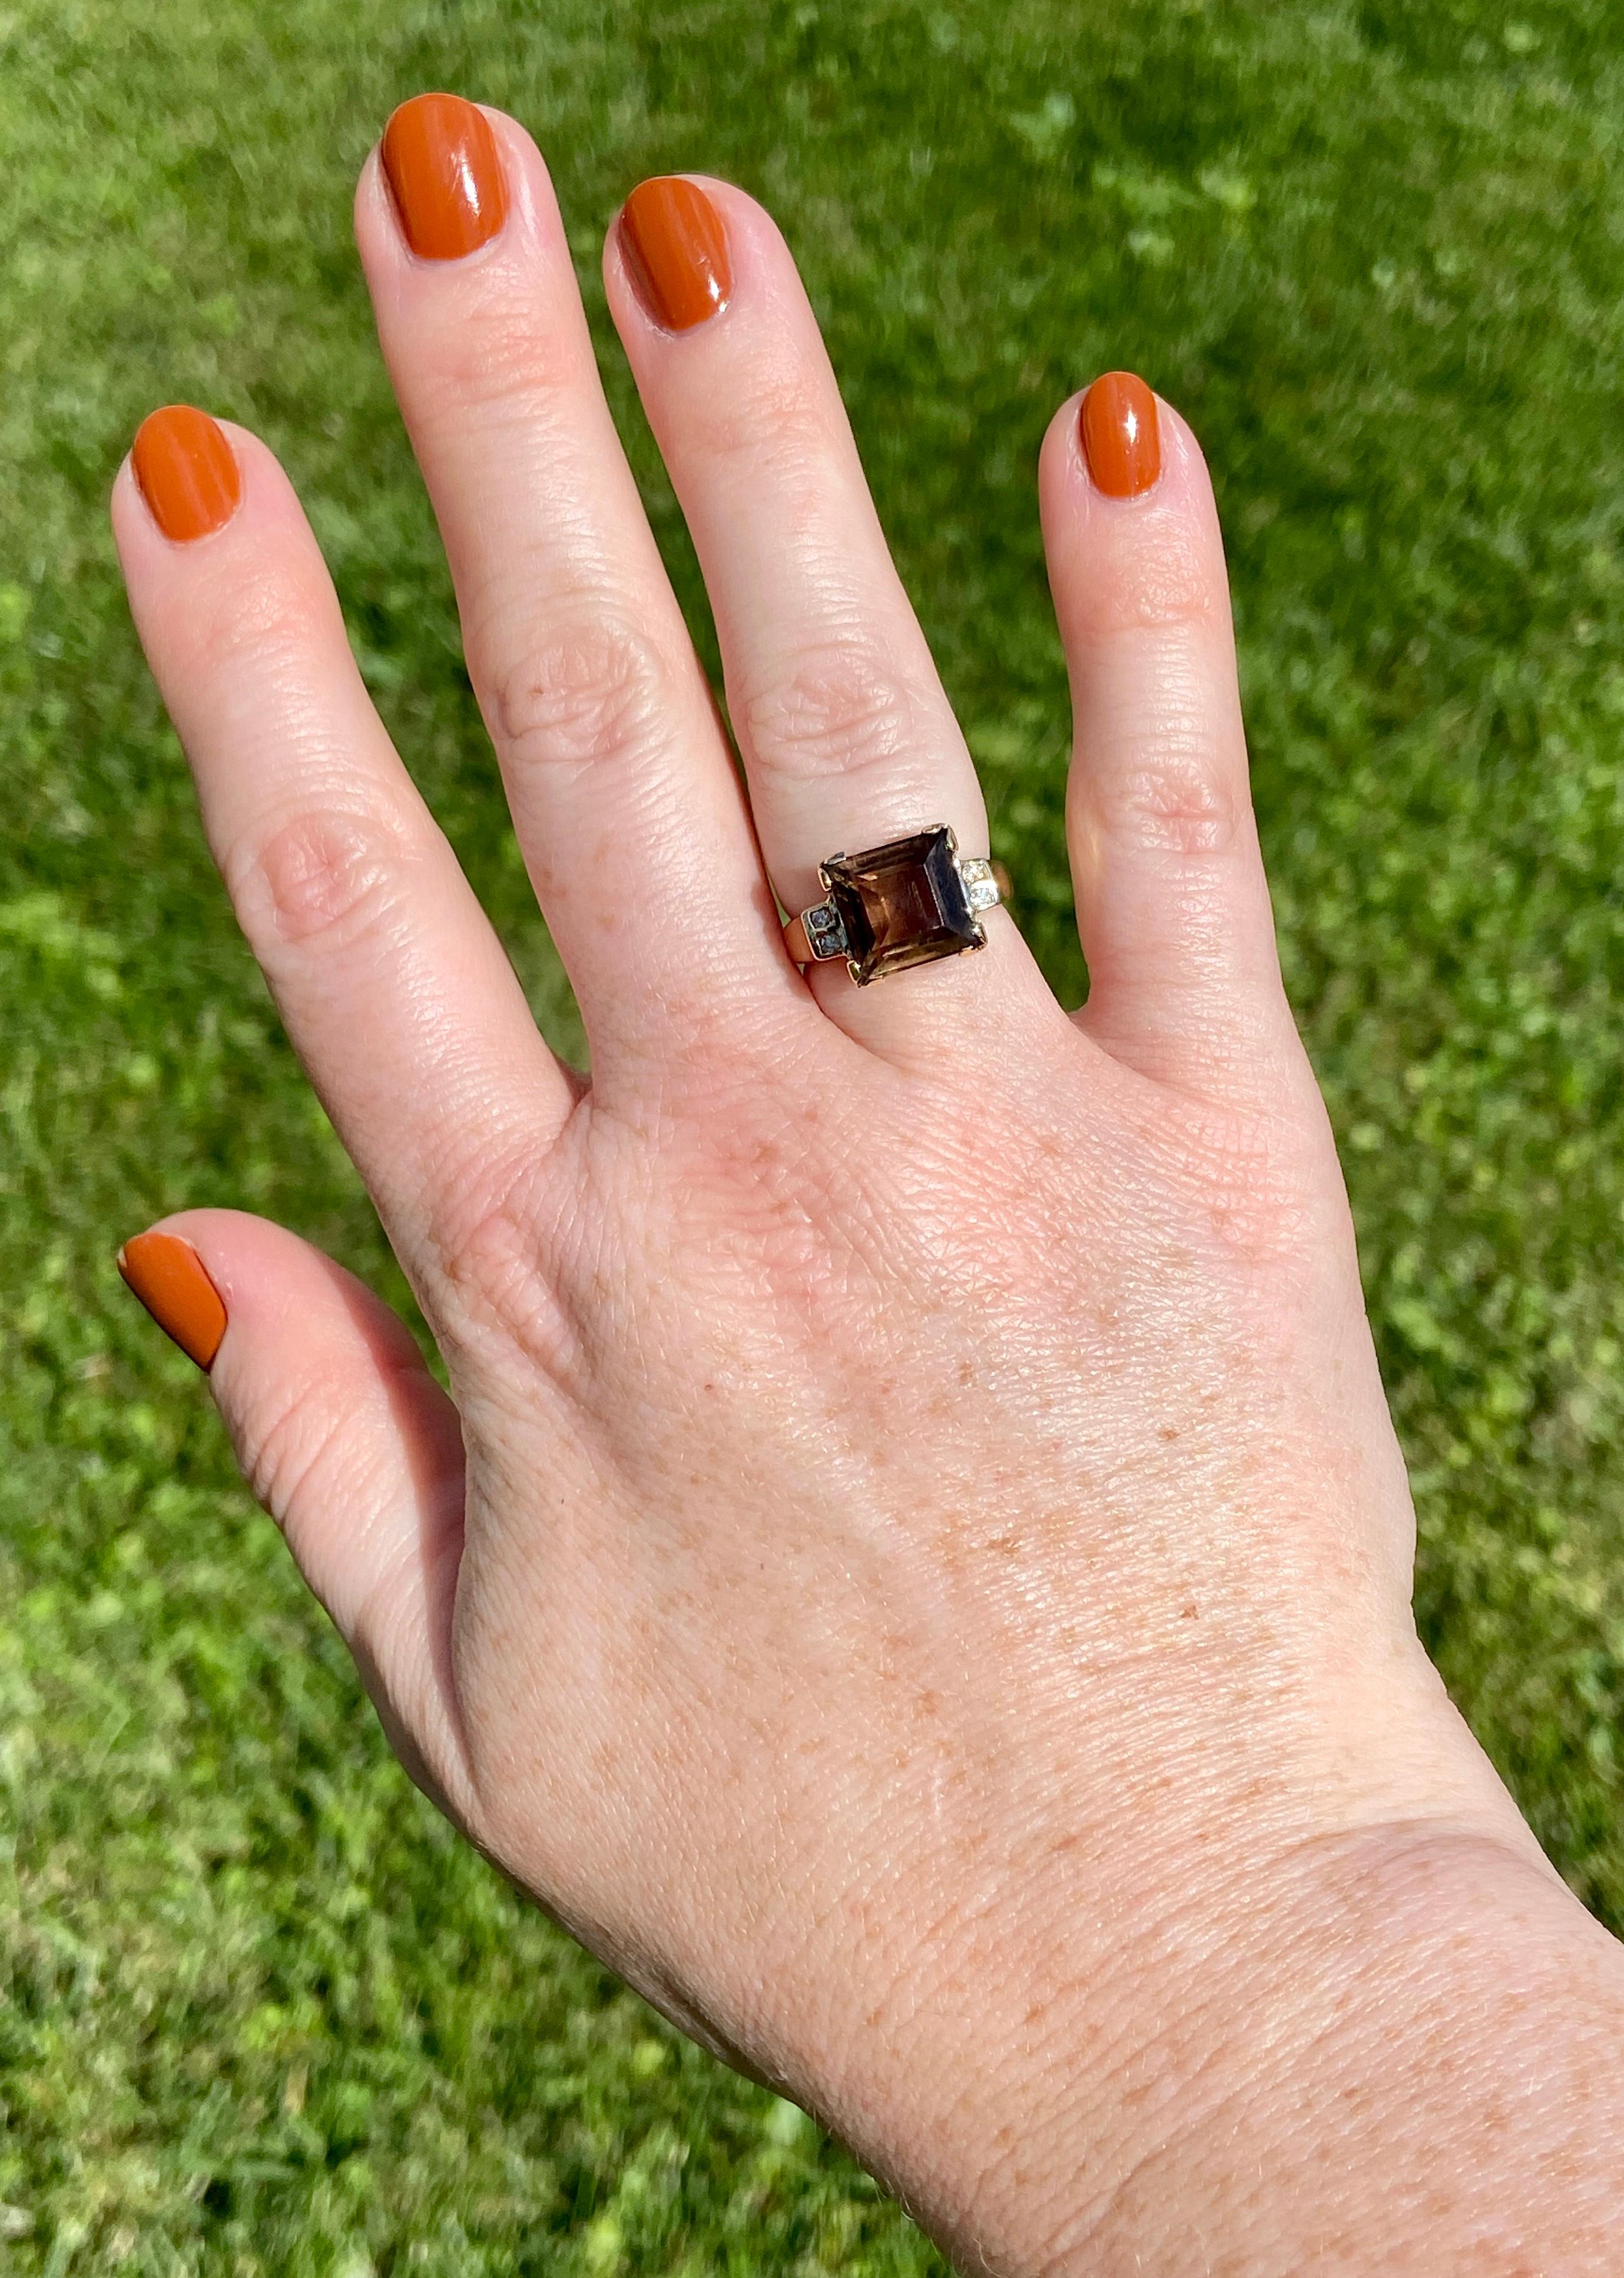 Delectable smoky quartz, the chocolatey sibling to other popular quartz varieties of amethyst and citrine, is the 3.81ct centerpiece of this vintage ring. The bold step-cut stone is set in v-prongs and is accented on each side with two diamonds, all